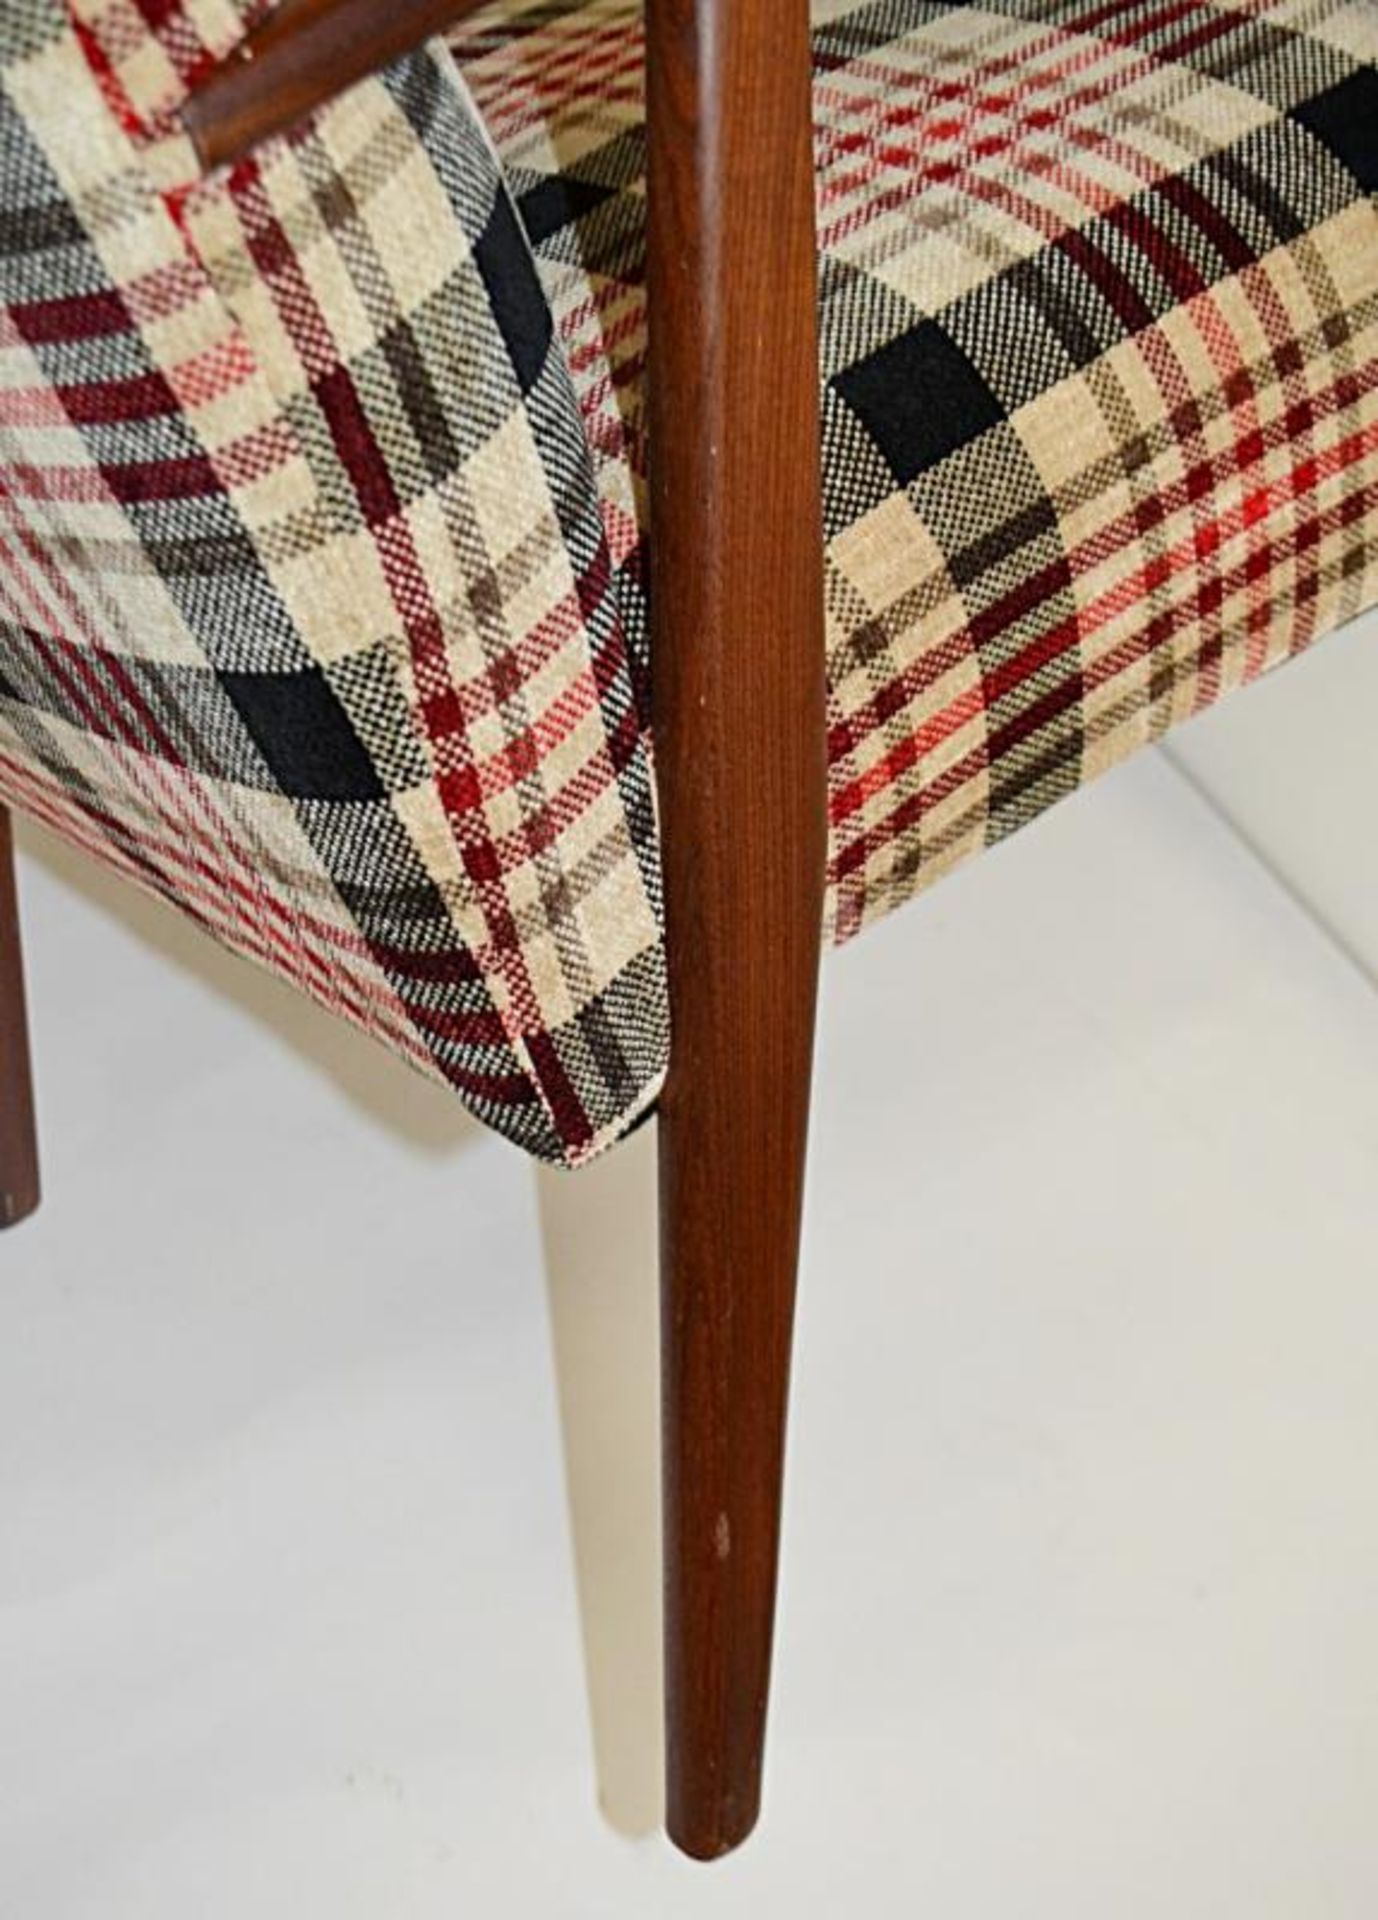 1 x JAB King Upholstery Mid Century Chair Upholstered In A 'Bourbon Pattern' - Dimensions (approx): - Image 9 of 9